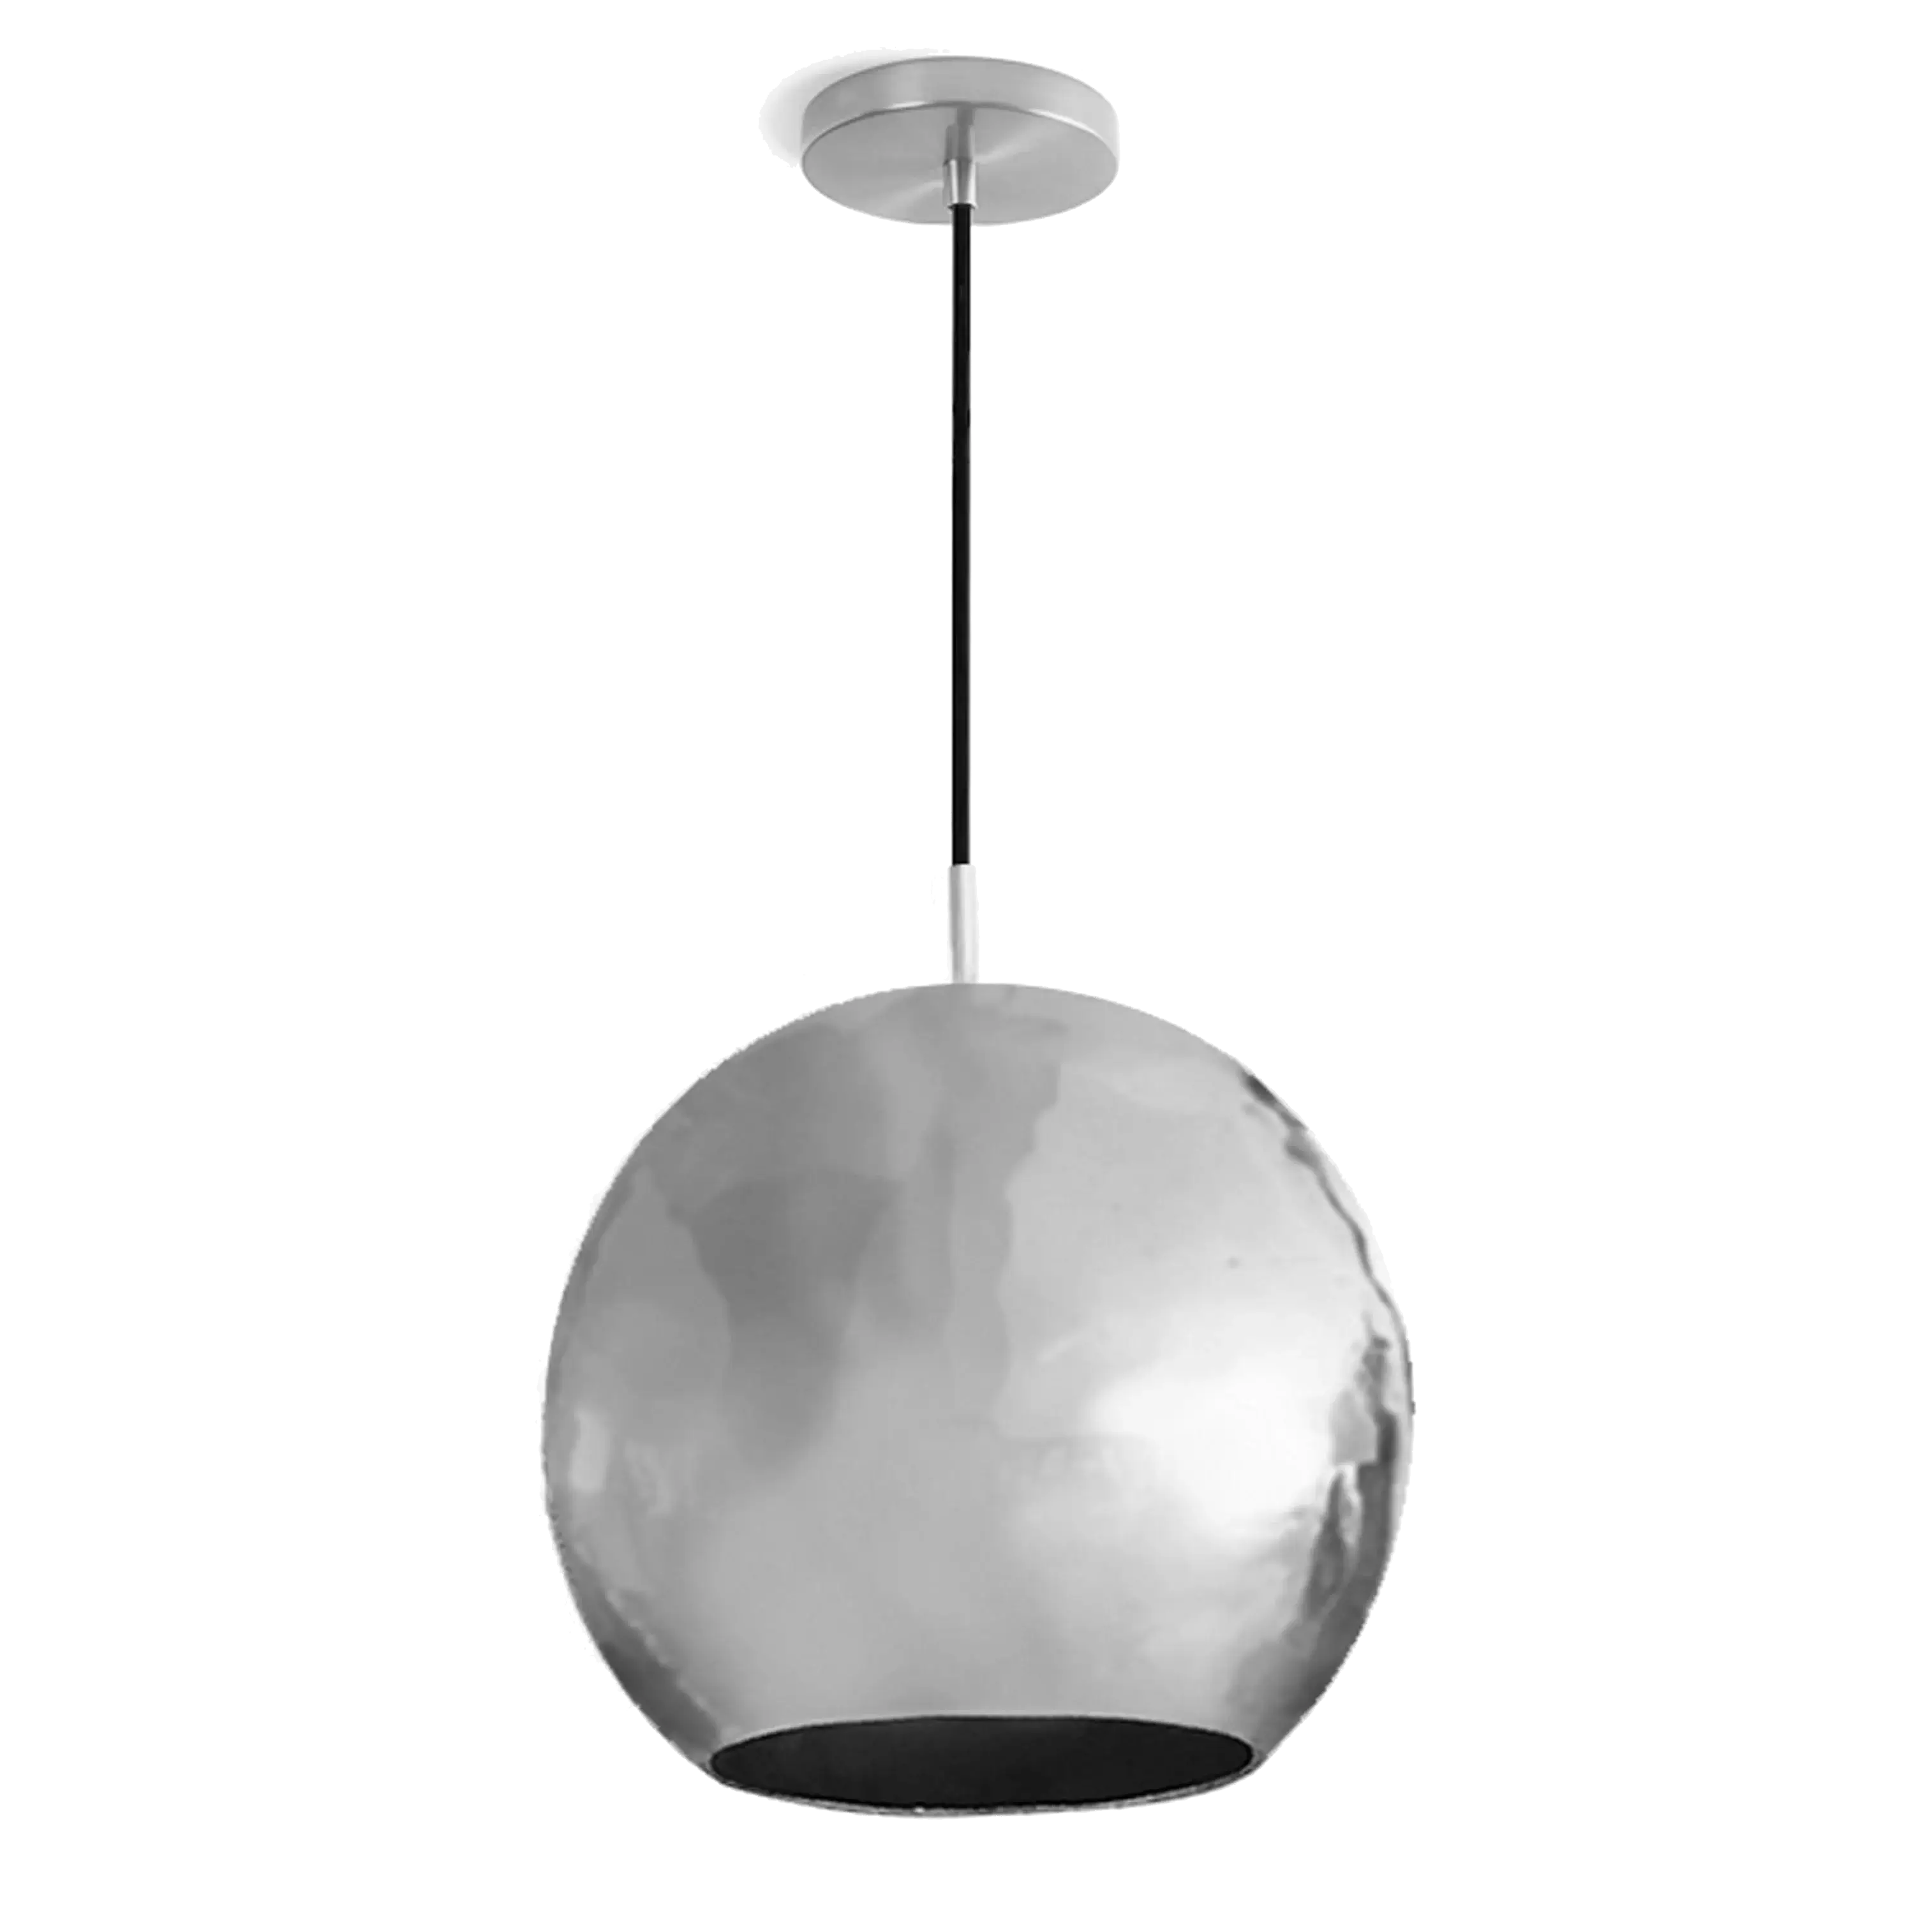 Dounia home Pendant light in nickel silver   made of Metal, Model: Mishal